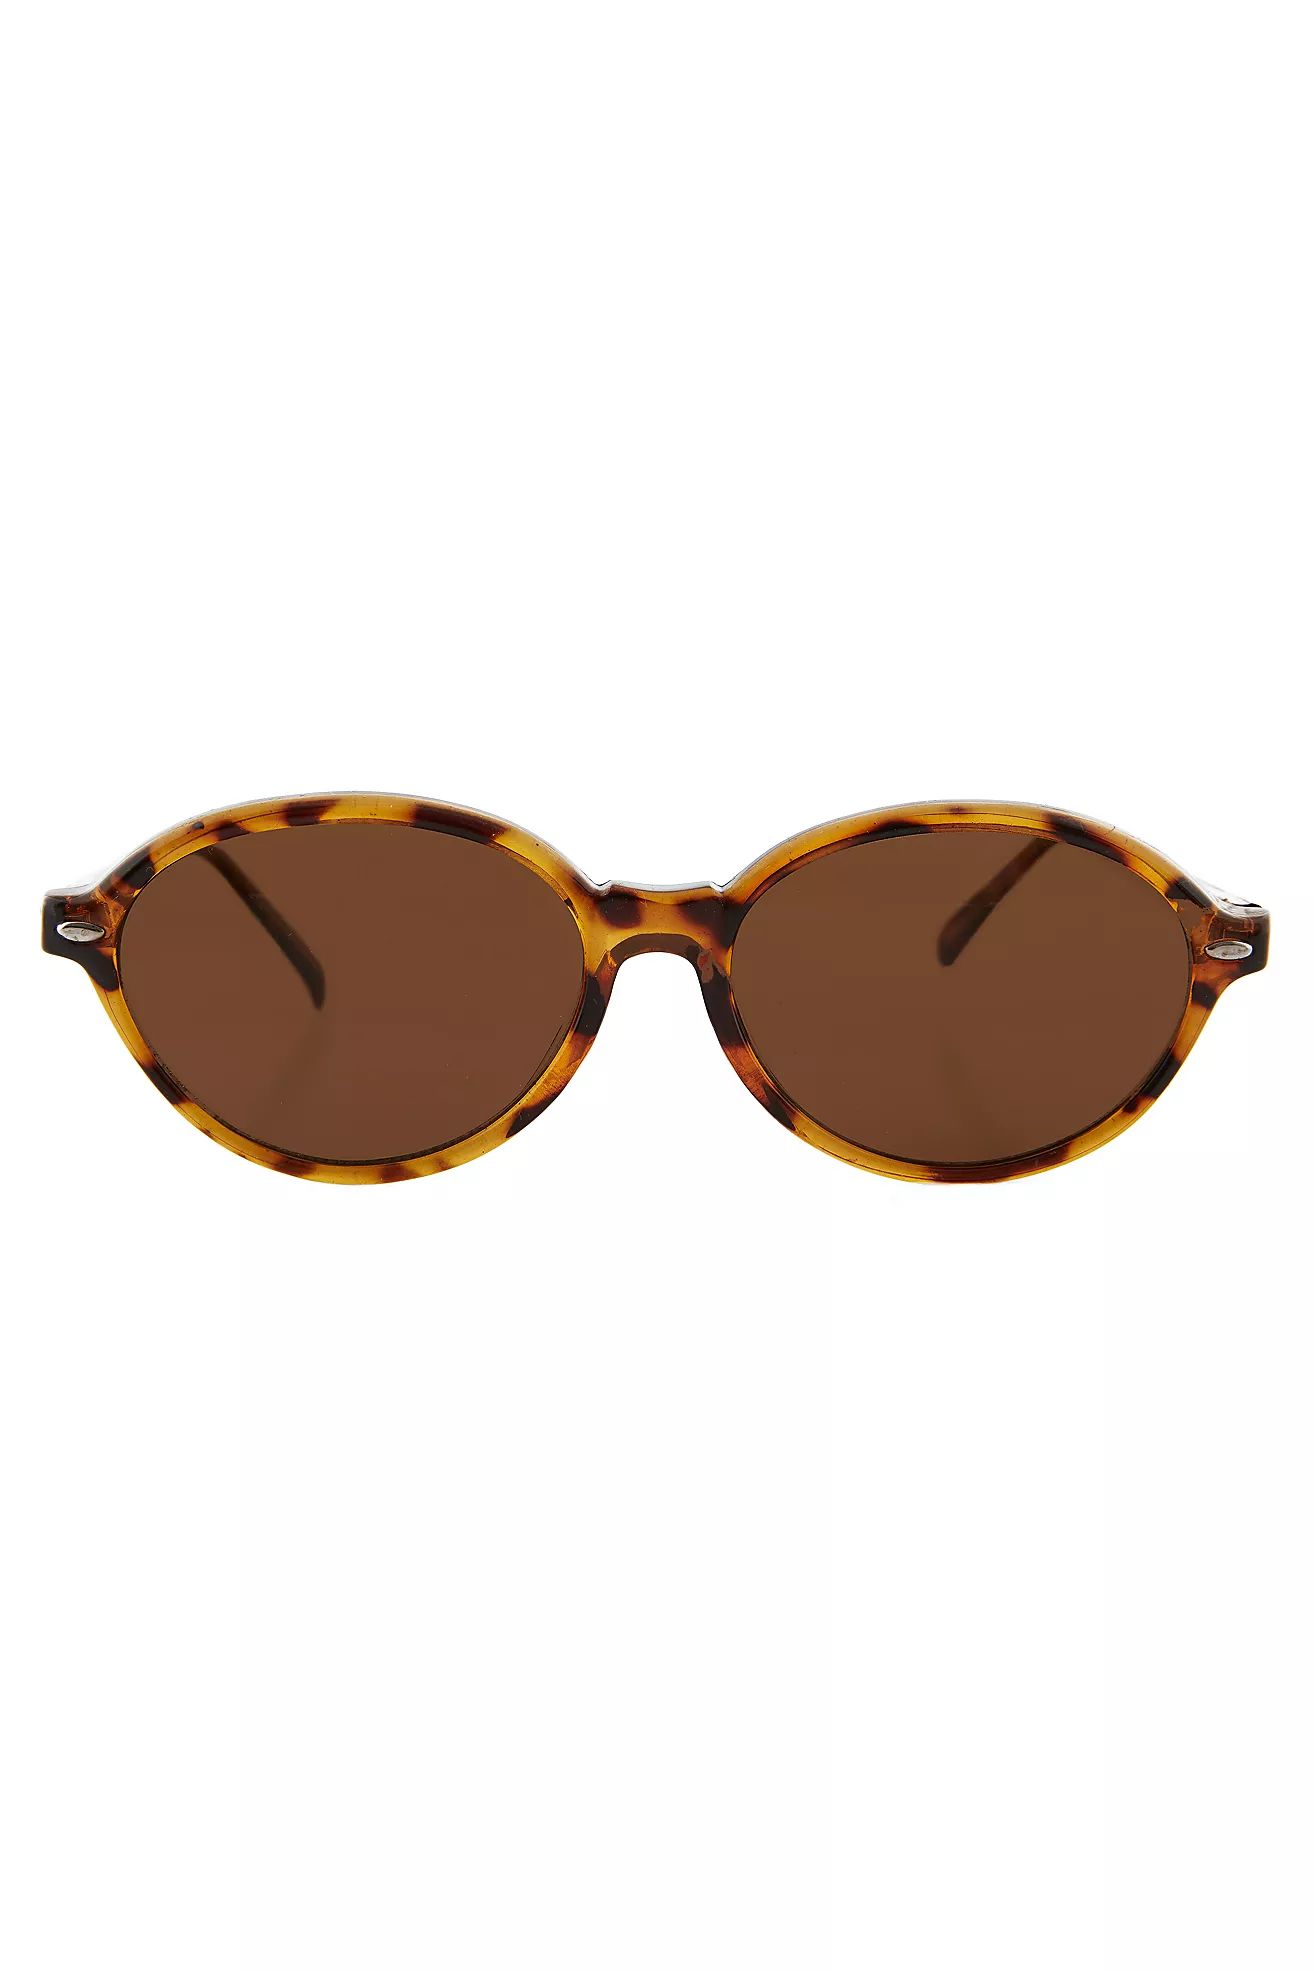 Vintage Alma Sunglasses Selected by Sunglass Museum | Free People (Global - UK&FR Excluded)